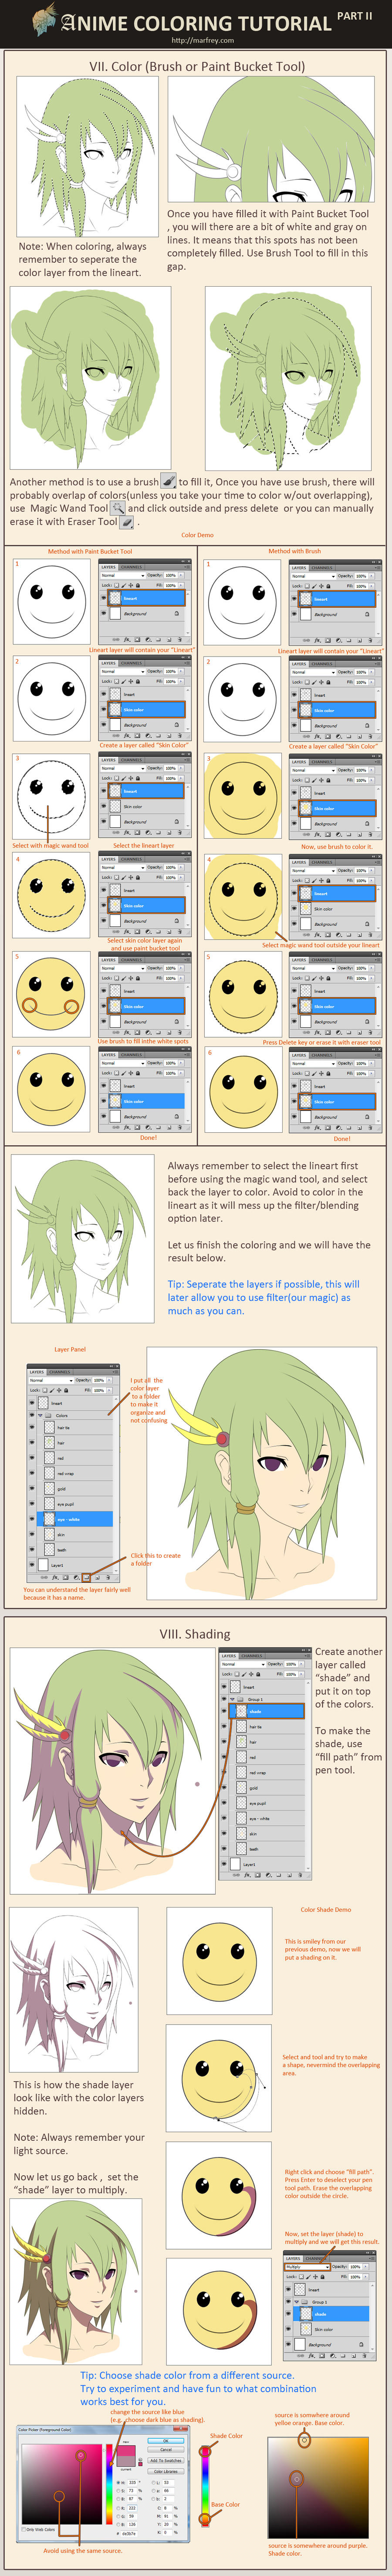 Anime Coloring Tutorial Part 2